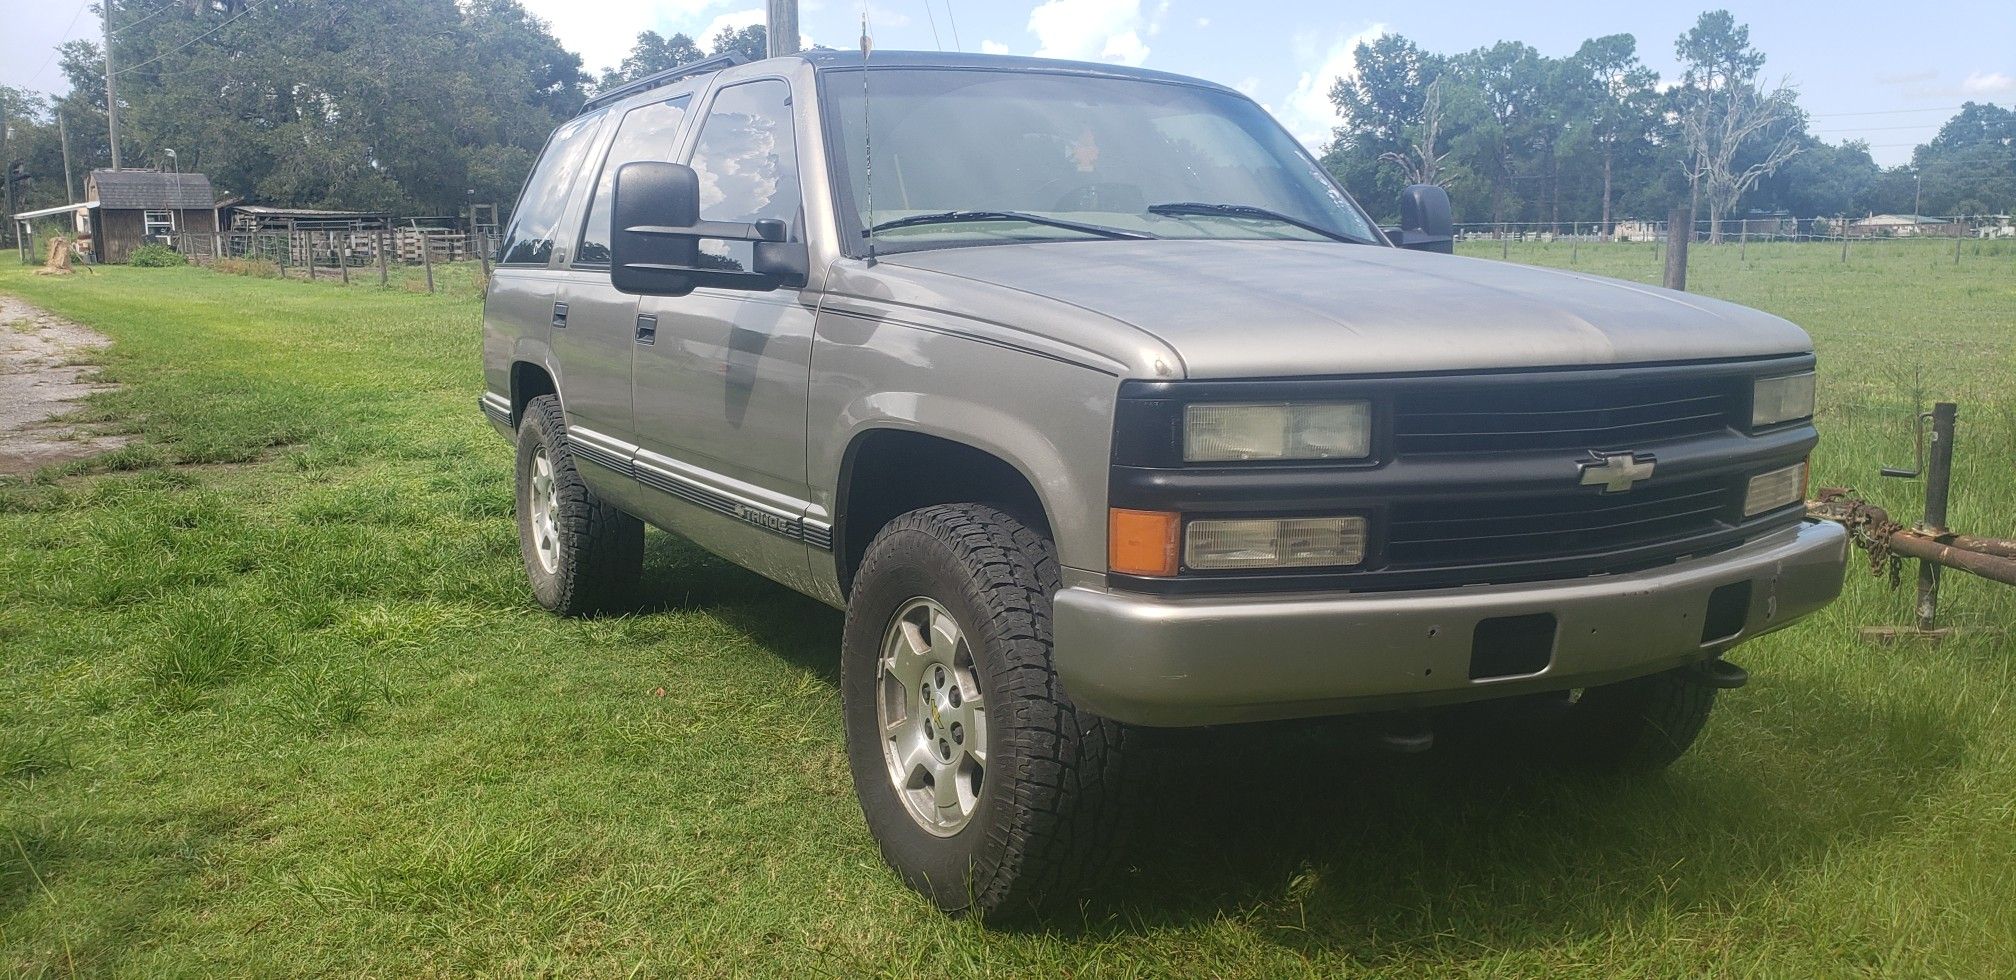 99 chevy tahoe trade for single cab truck work /woods truck